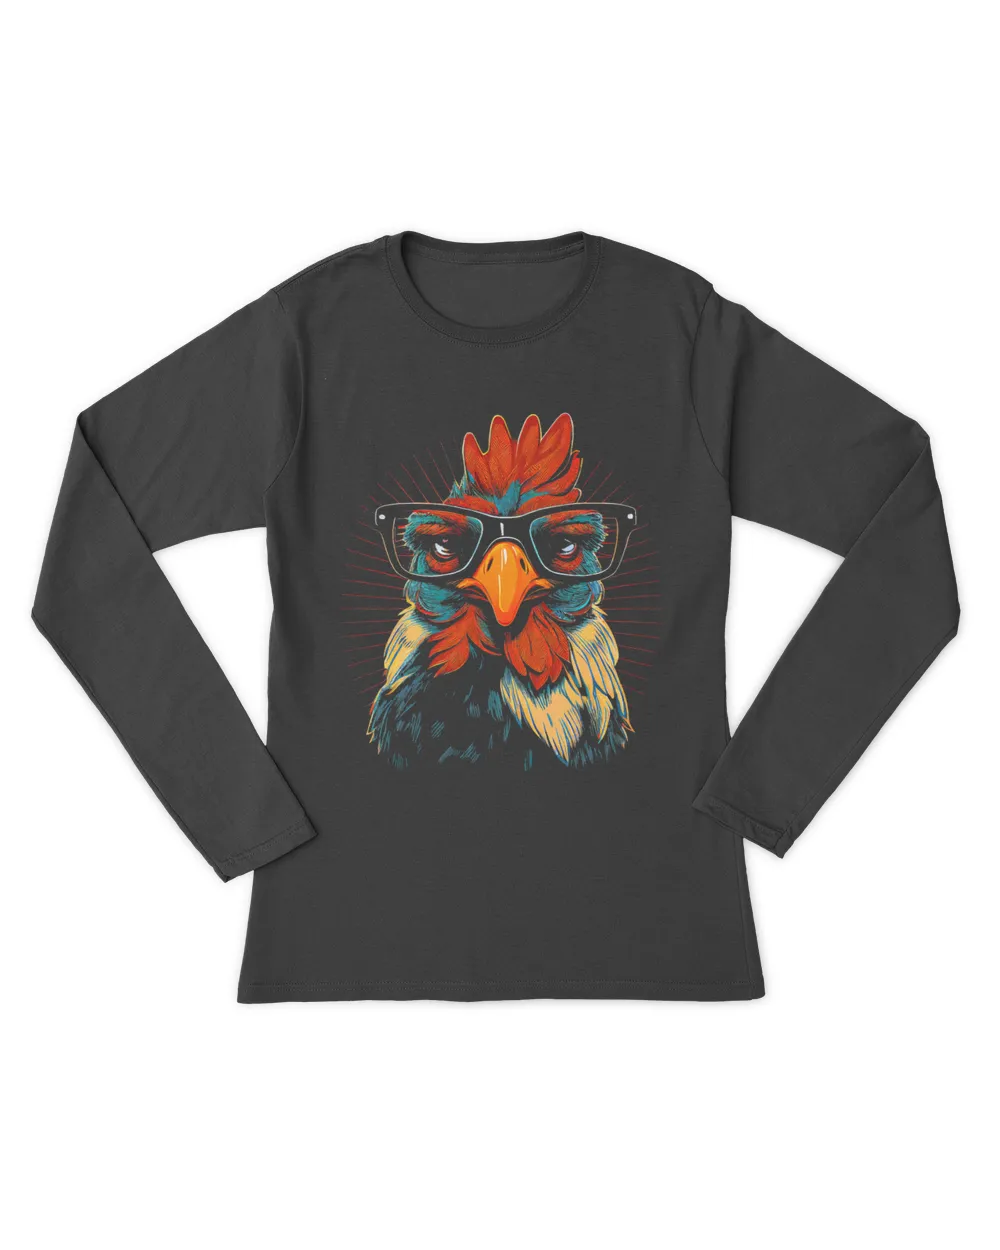 Funny Rooster Chicken Glasses Vintage Male Chicken